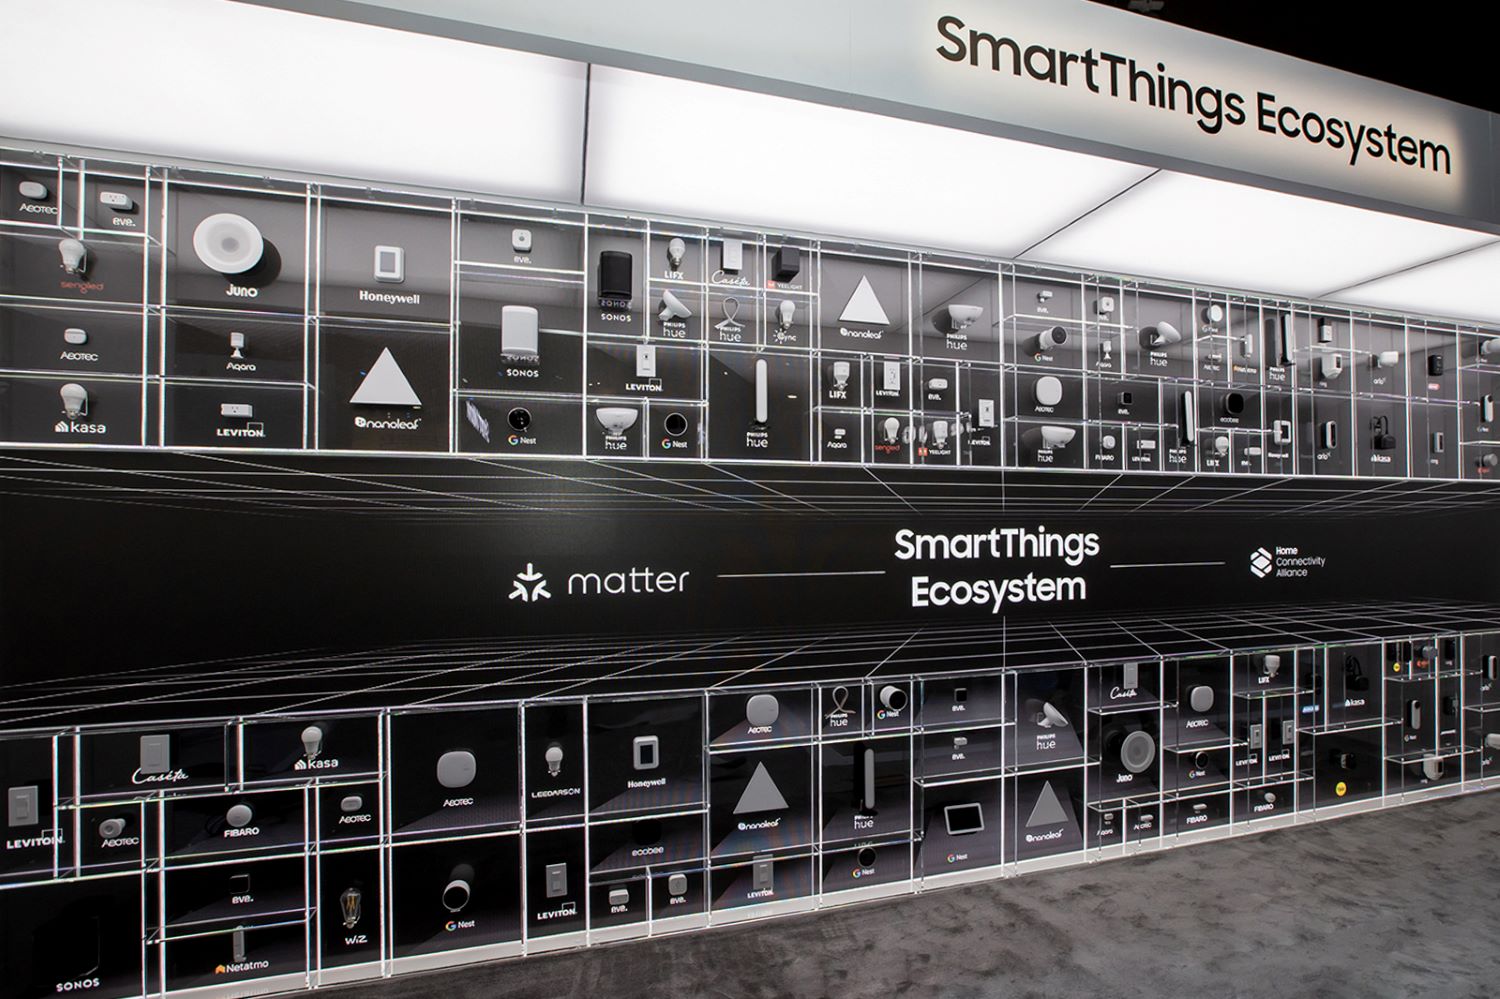 smartthingsecosystemwall(1)re